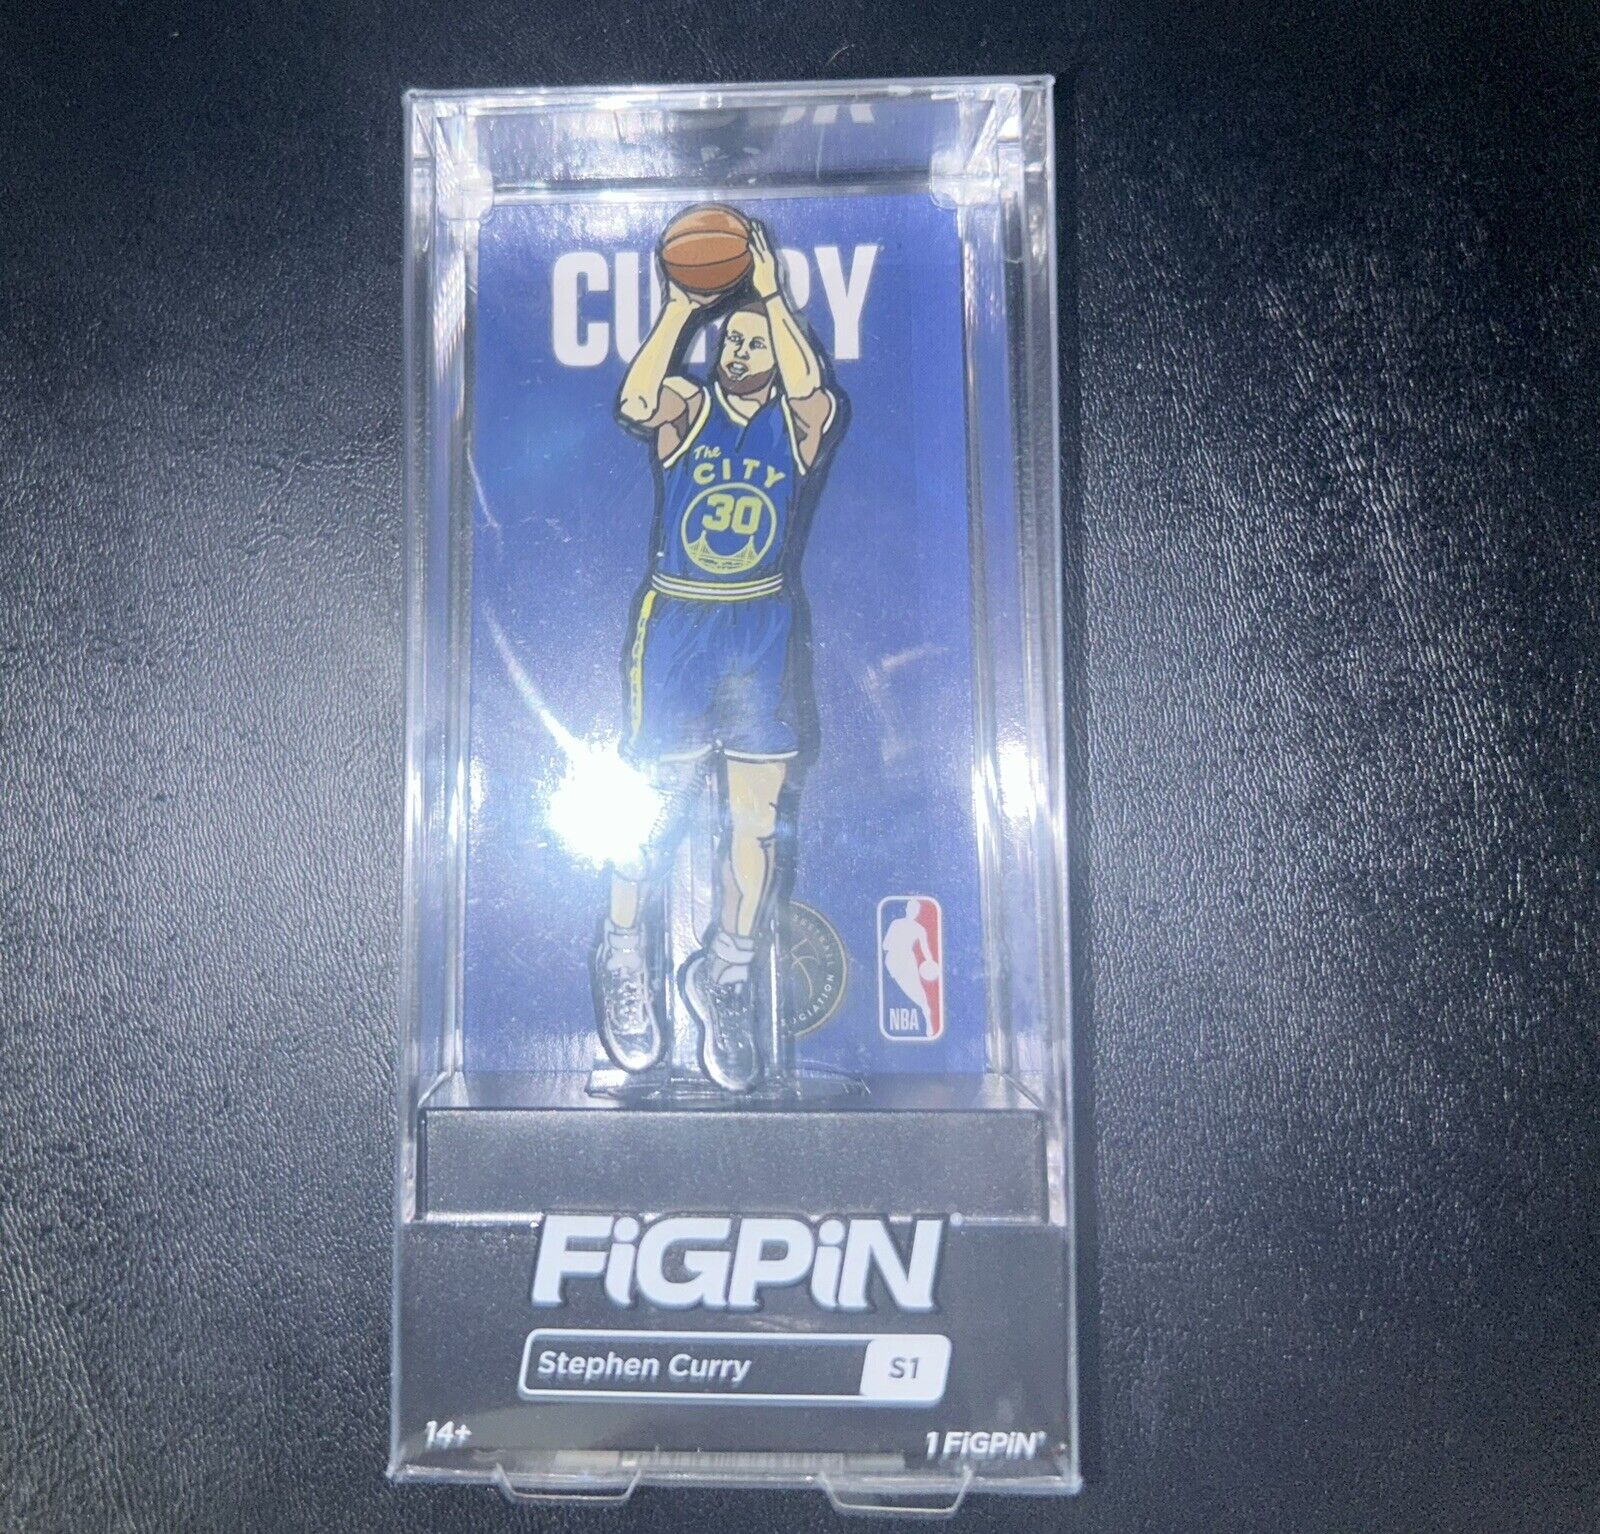 FiGPiN NBA Golden State Warriors Stephen Curry #30 S1 Collectible 1 Figpin